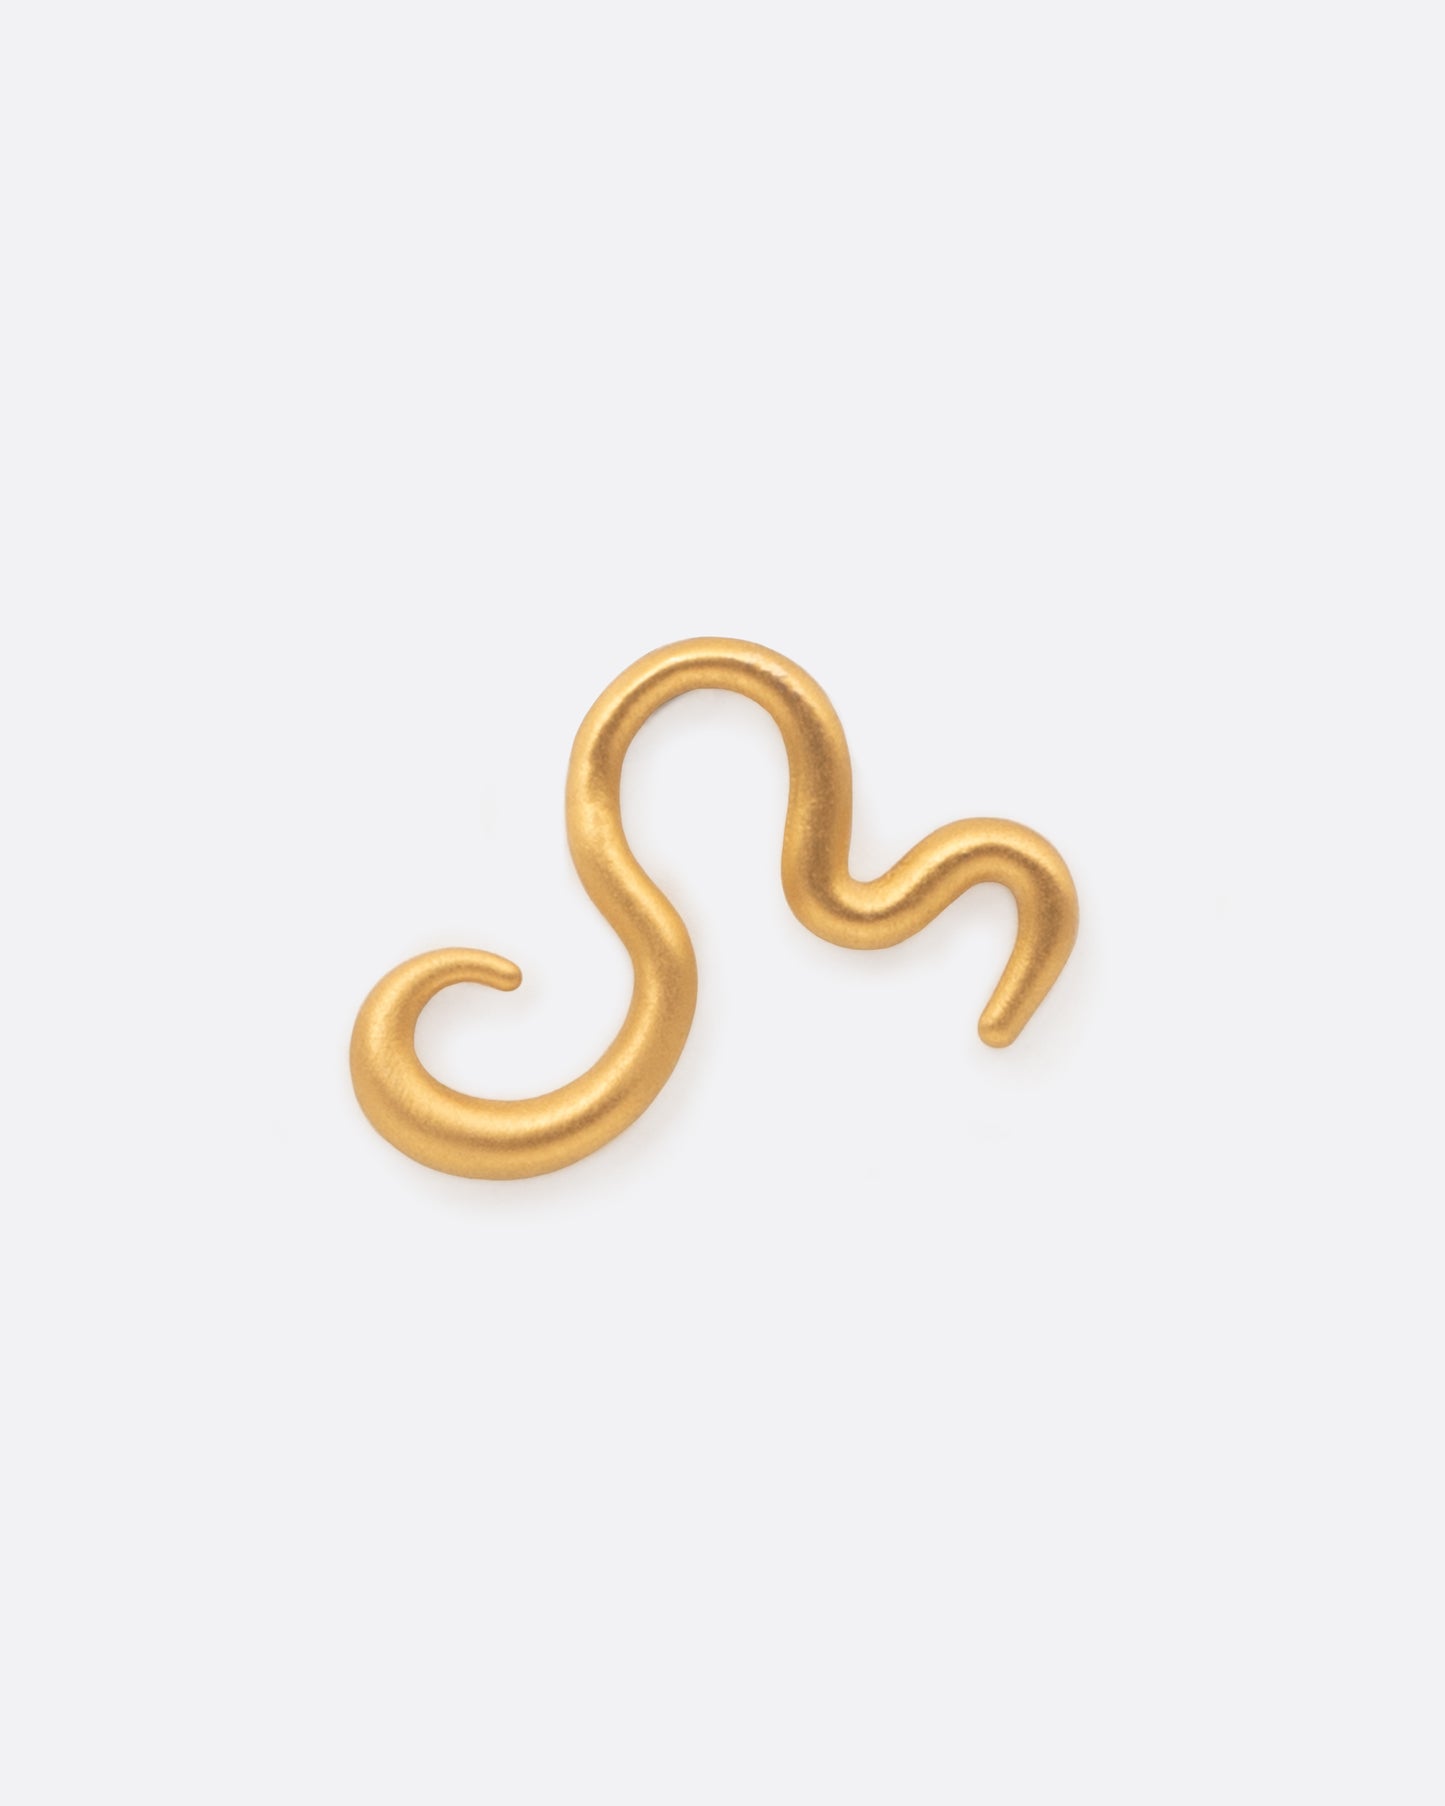 A curved 22k yellow gold snake stud earring, meant for the right ear.